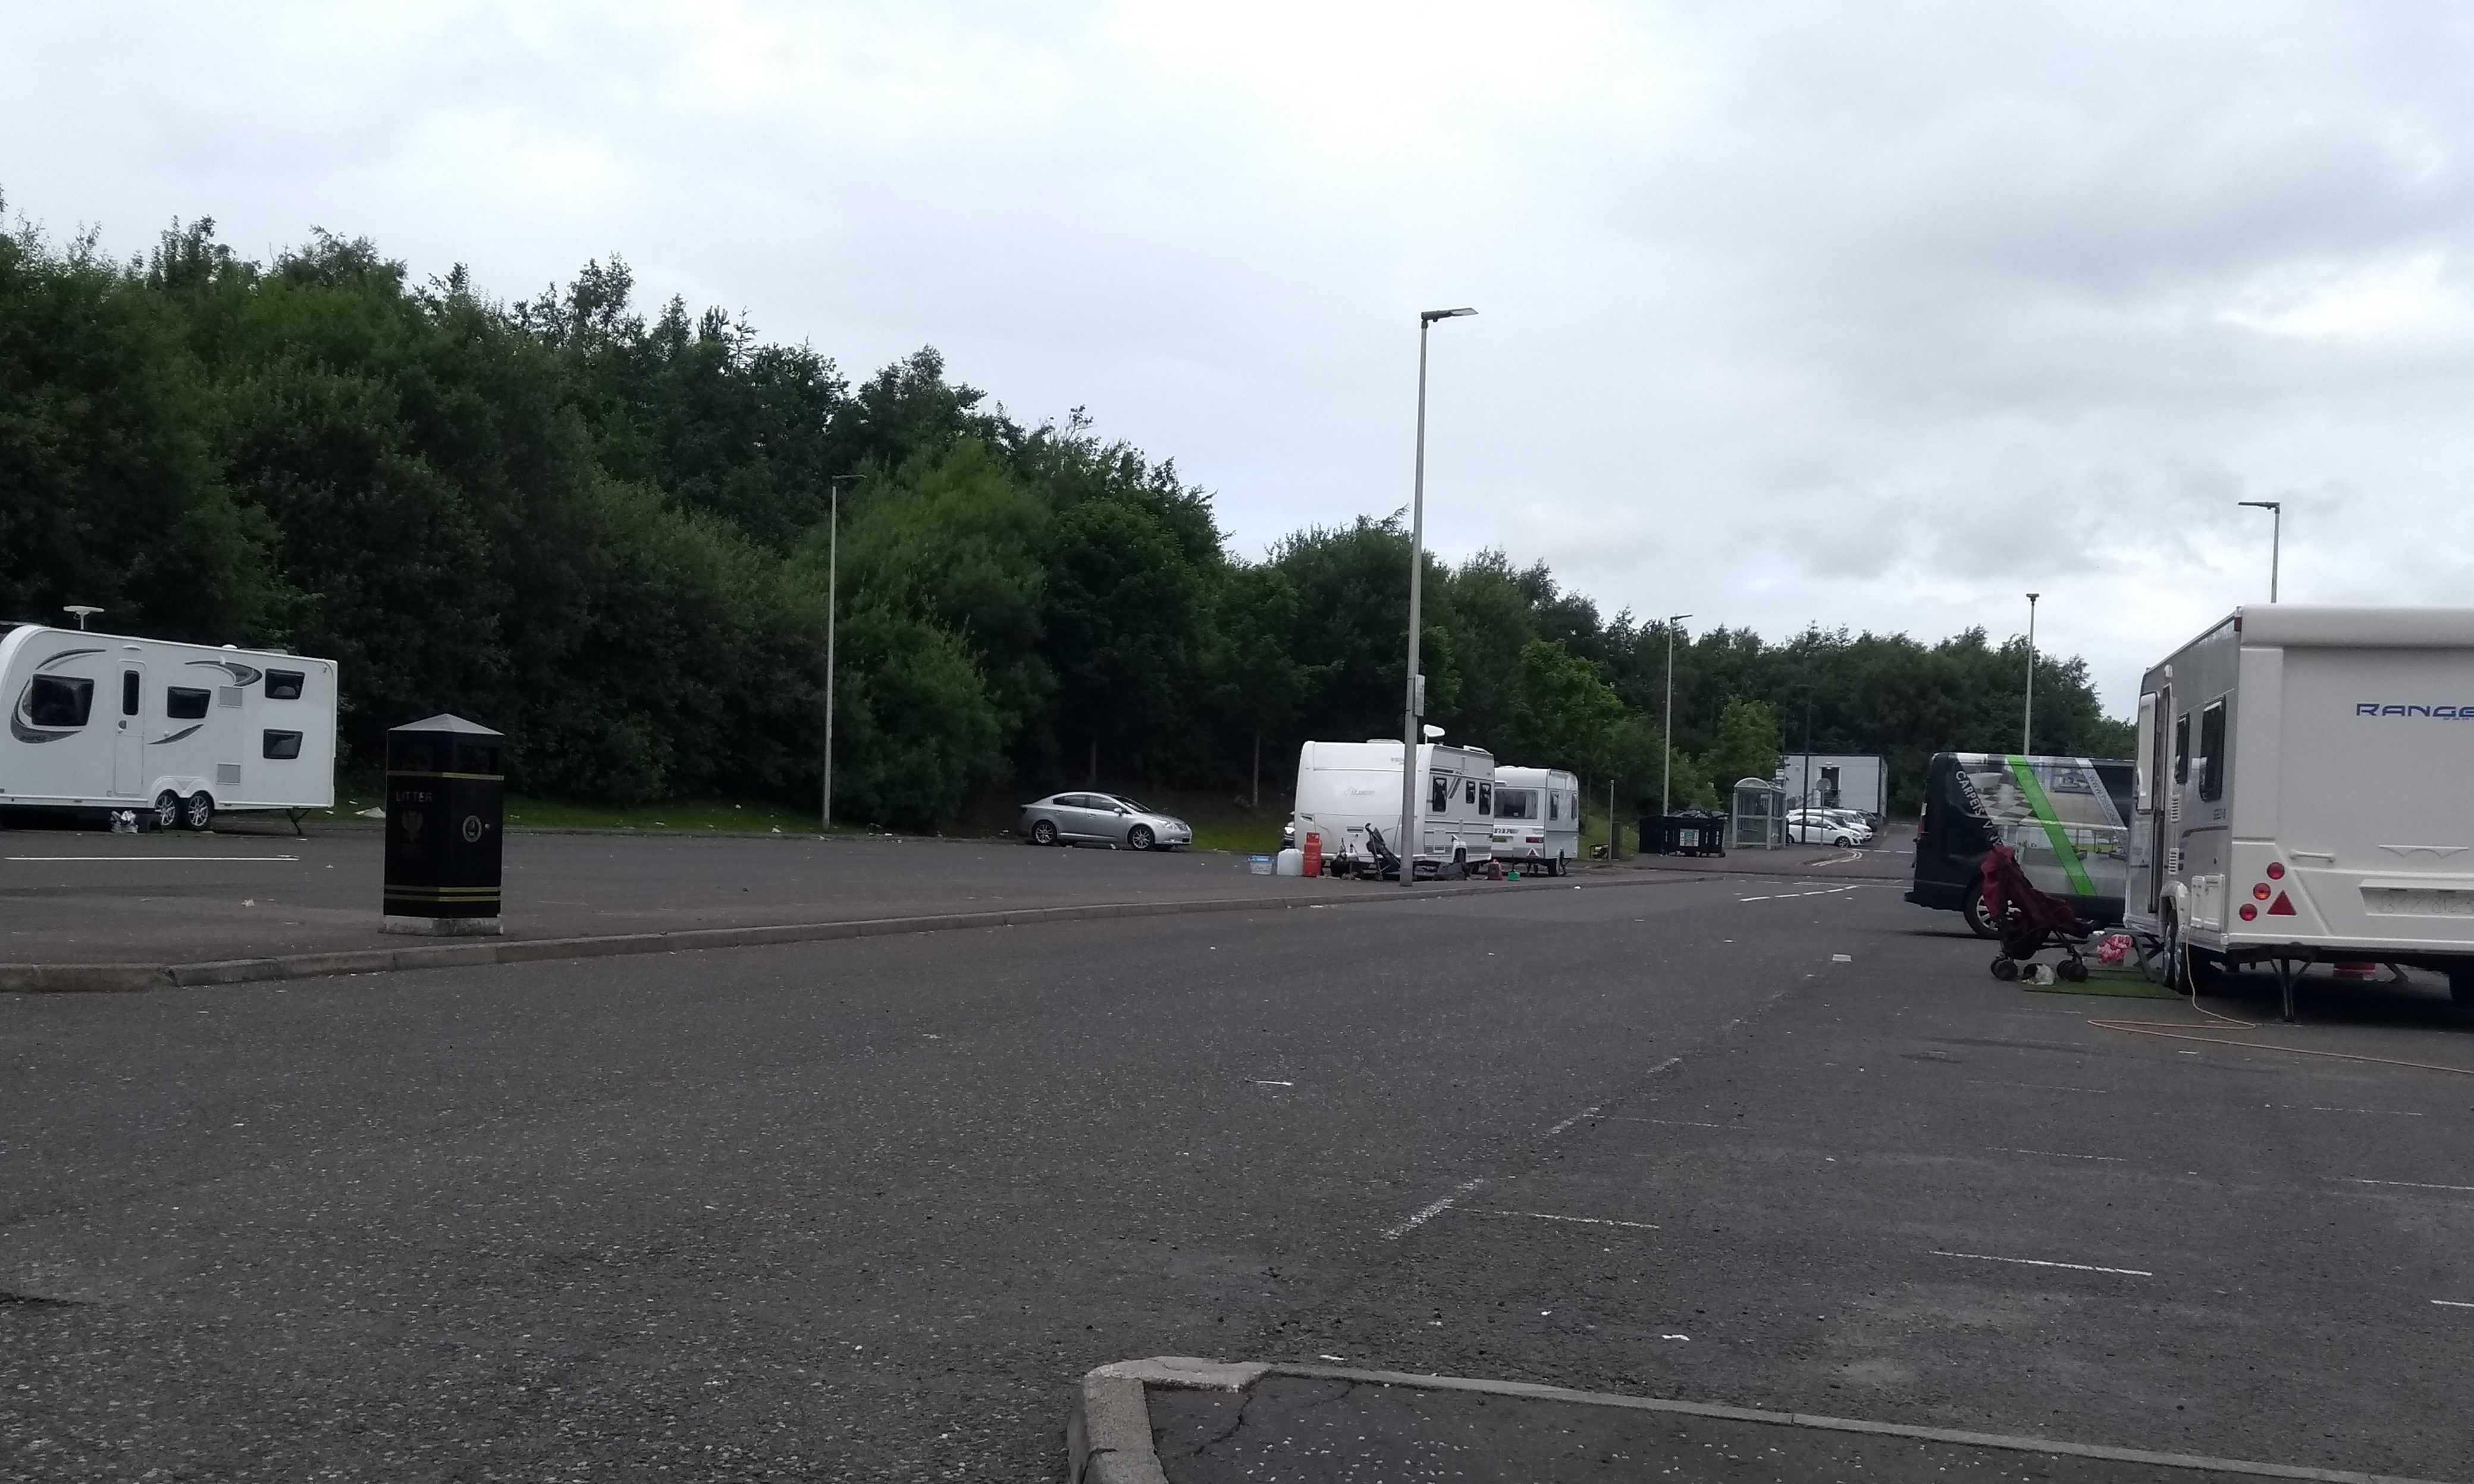 Travellers at Broxden Park and Ride